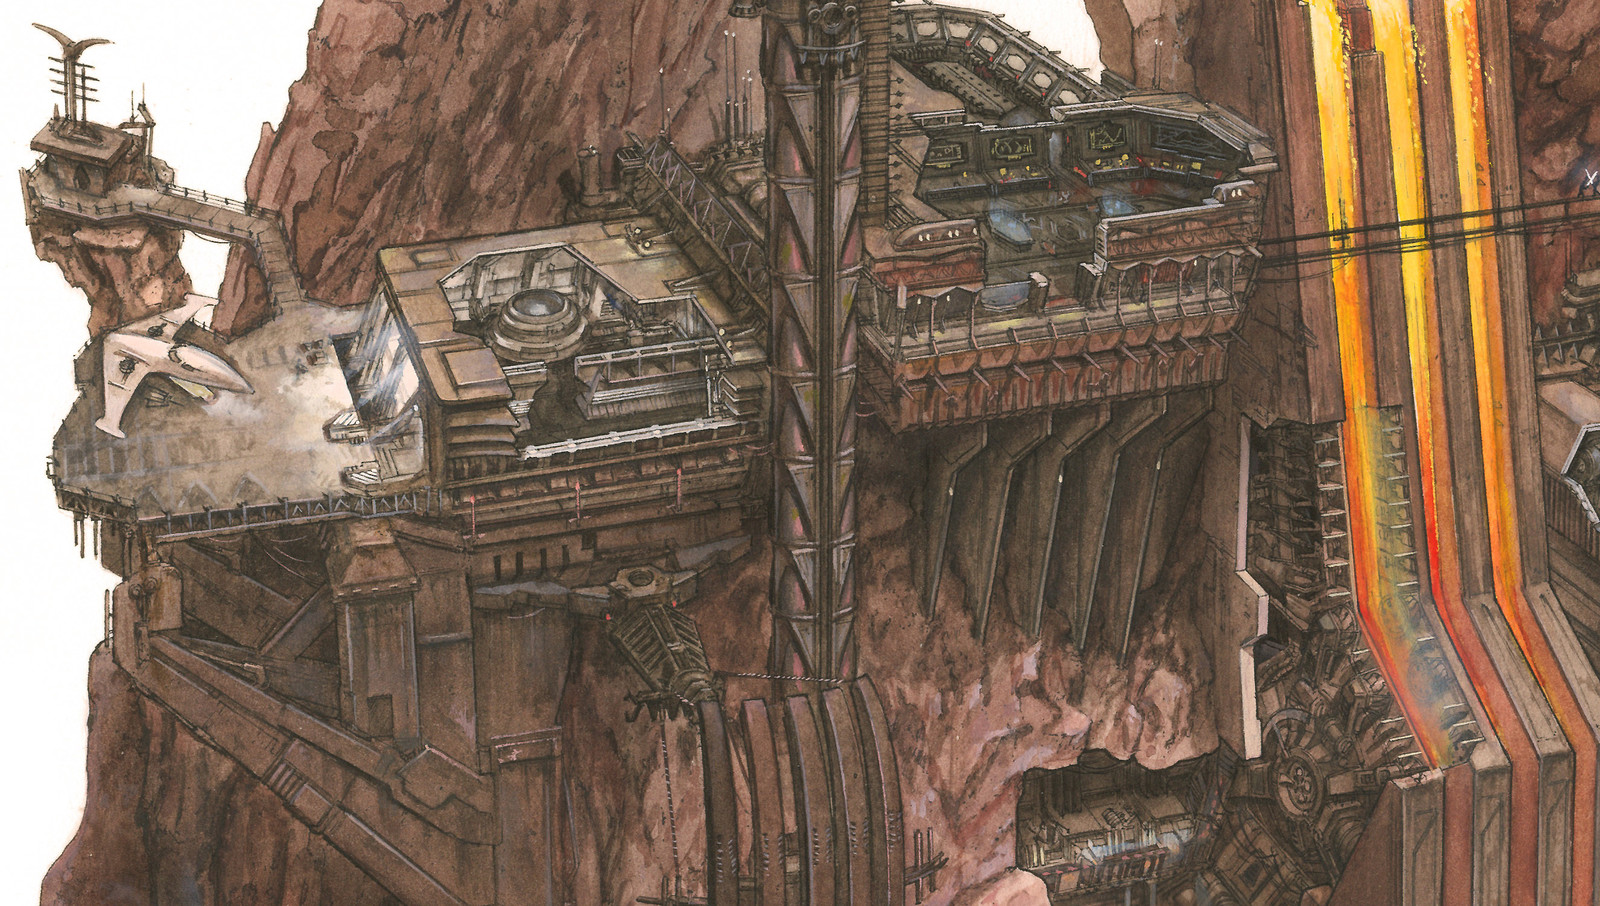 Mustafar Lava mine close up showing landing pad with Padme's spacecraft and the control room for droid operations.